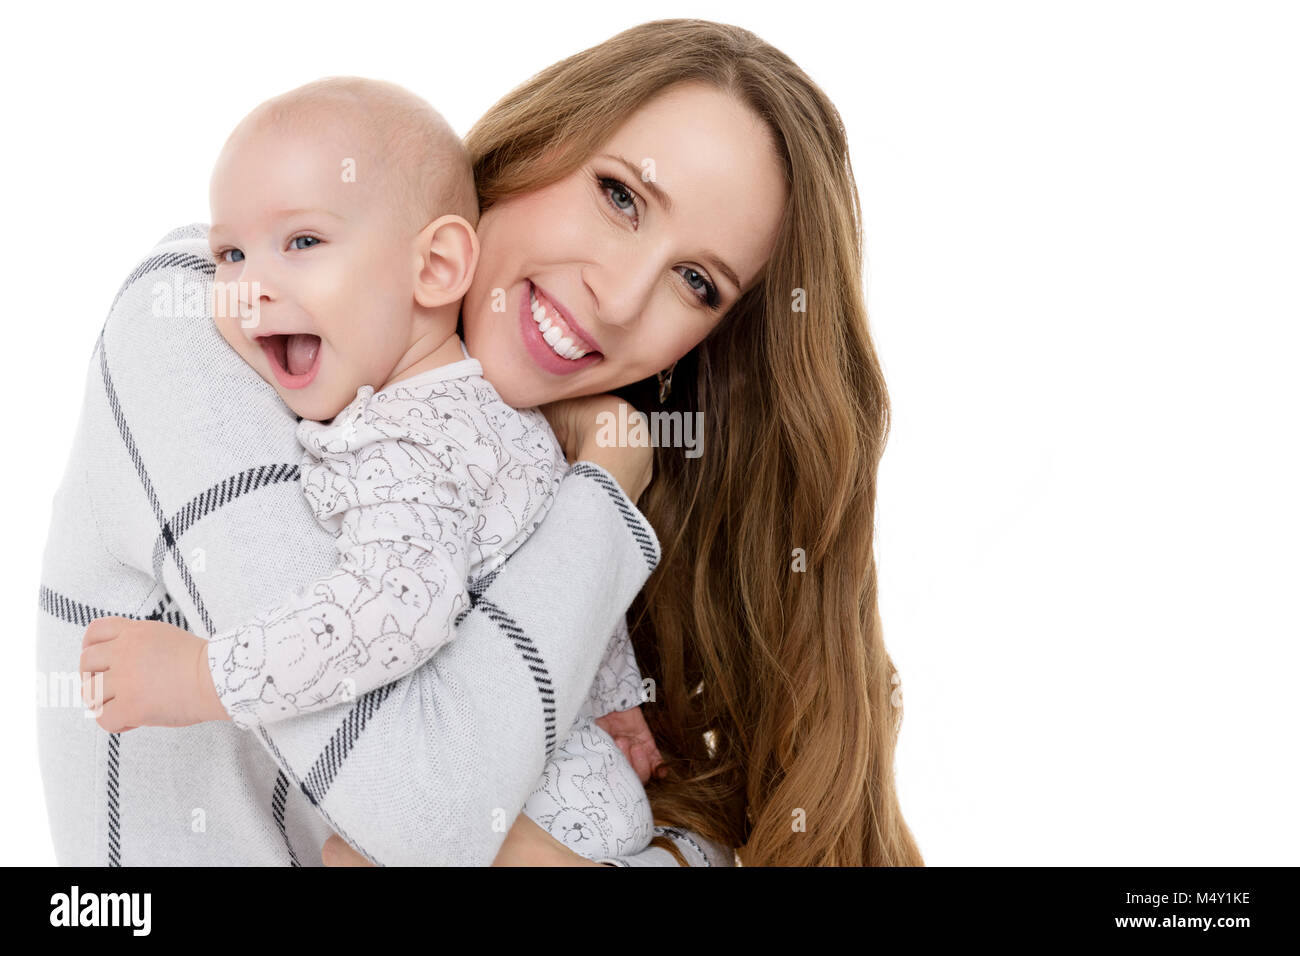 Happy mother hugging her adorable baby son. Happy family. Mother and newborn child portrait isolated on white background. Stock Photo